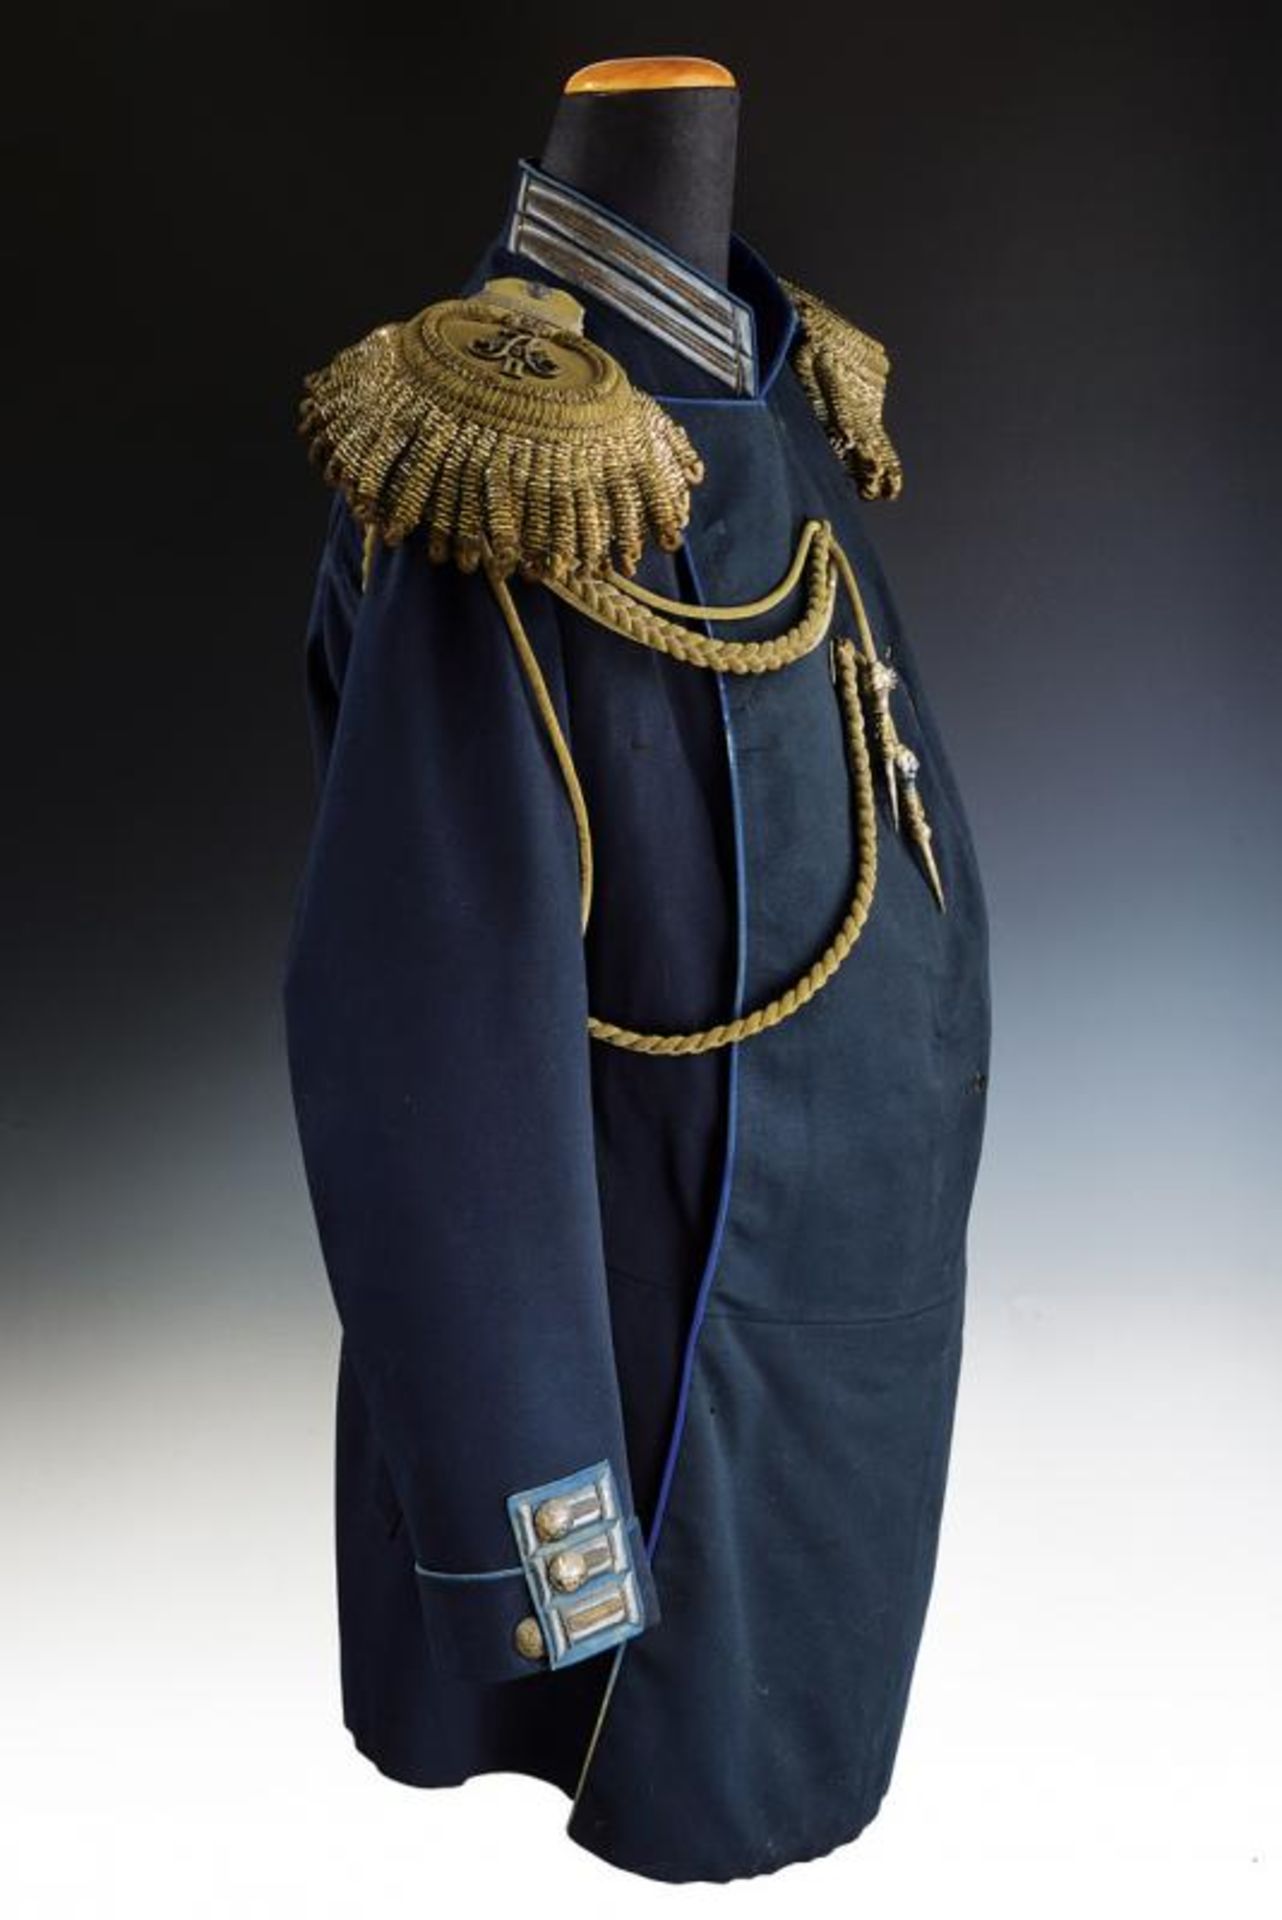 A General officer's uniform of the 3rd Finnish Battalion of jagers belonged to Tsar Alexander III - Image 10 of 21